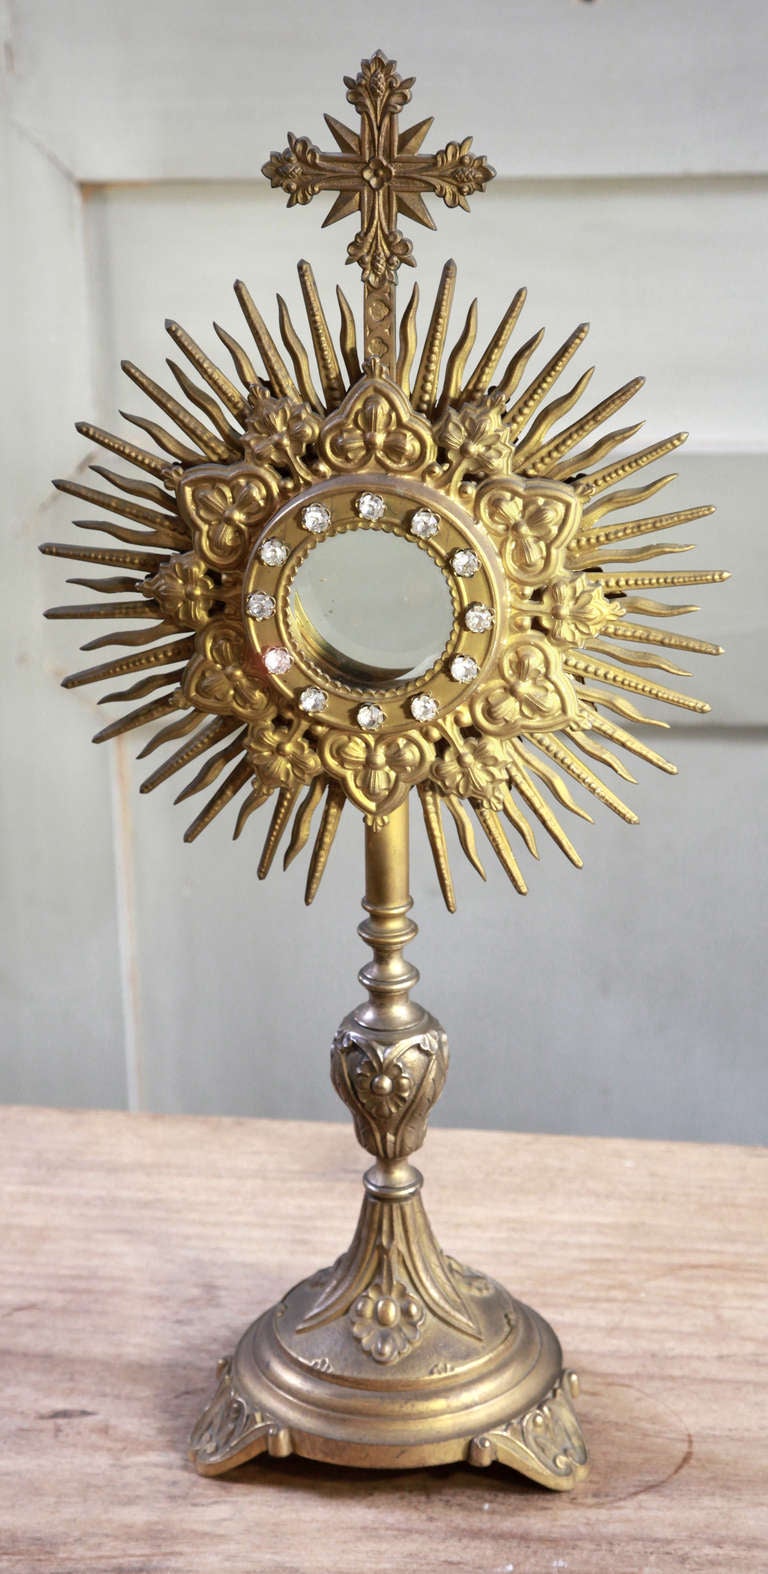 Antique bronze monstrance survives in a remarkable degree of preservation with intricate detail made possible by only the most talented artisans of Paris!
ca. 1870
Please note that the prices on our website are updated far more frequently than on